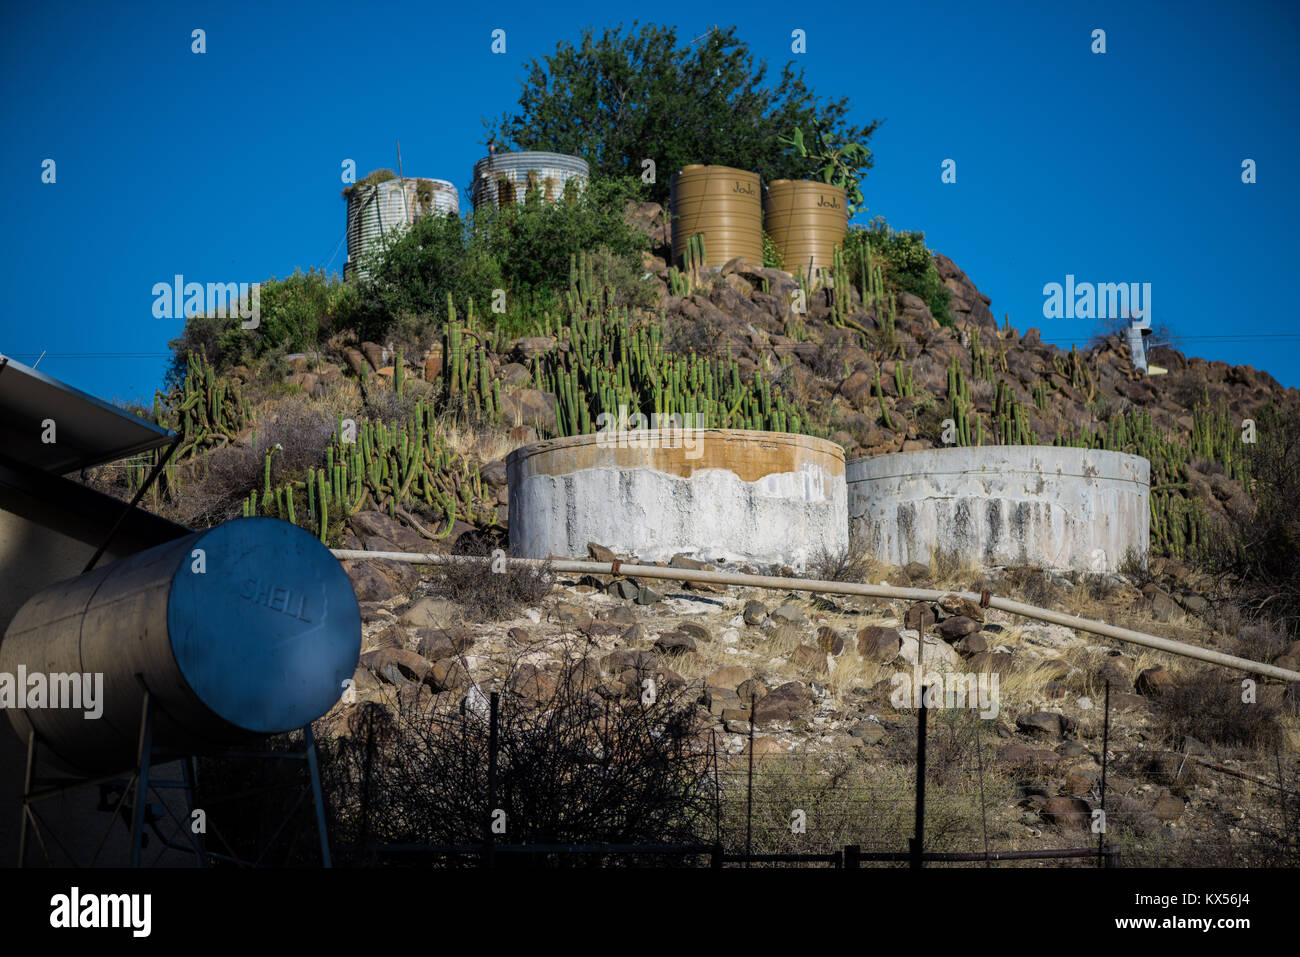 A Royal Dutch Shell fuel tank adjacent to water storage tanks in the Northern Cape, South Africa Stock Photo